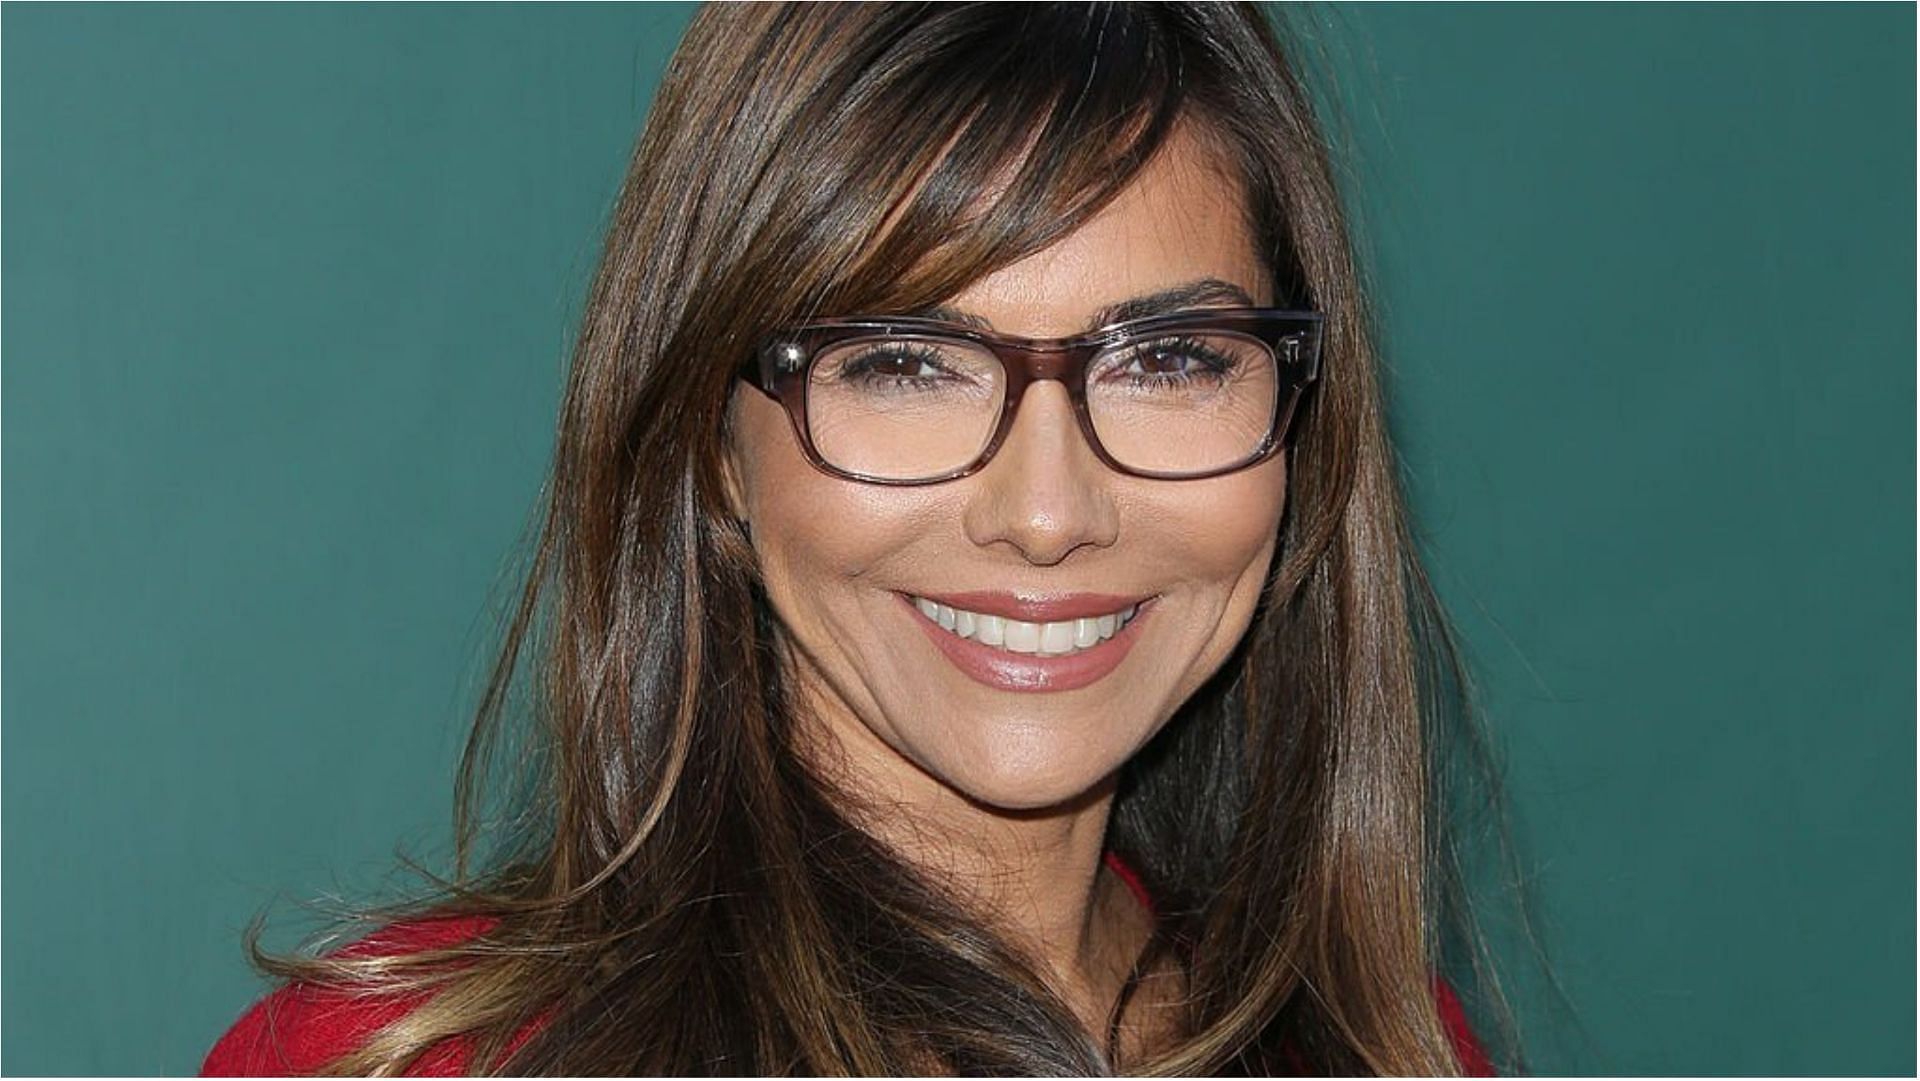 Vanessa Marcil has accumulated a lot of wealth from her career as an actress (Image via Paul Archuleta/Getty Images)